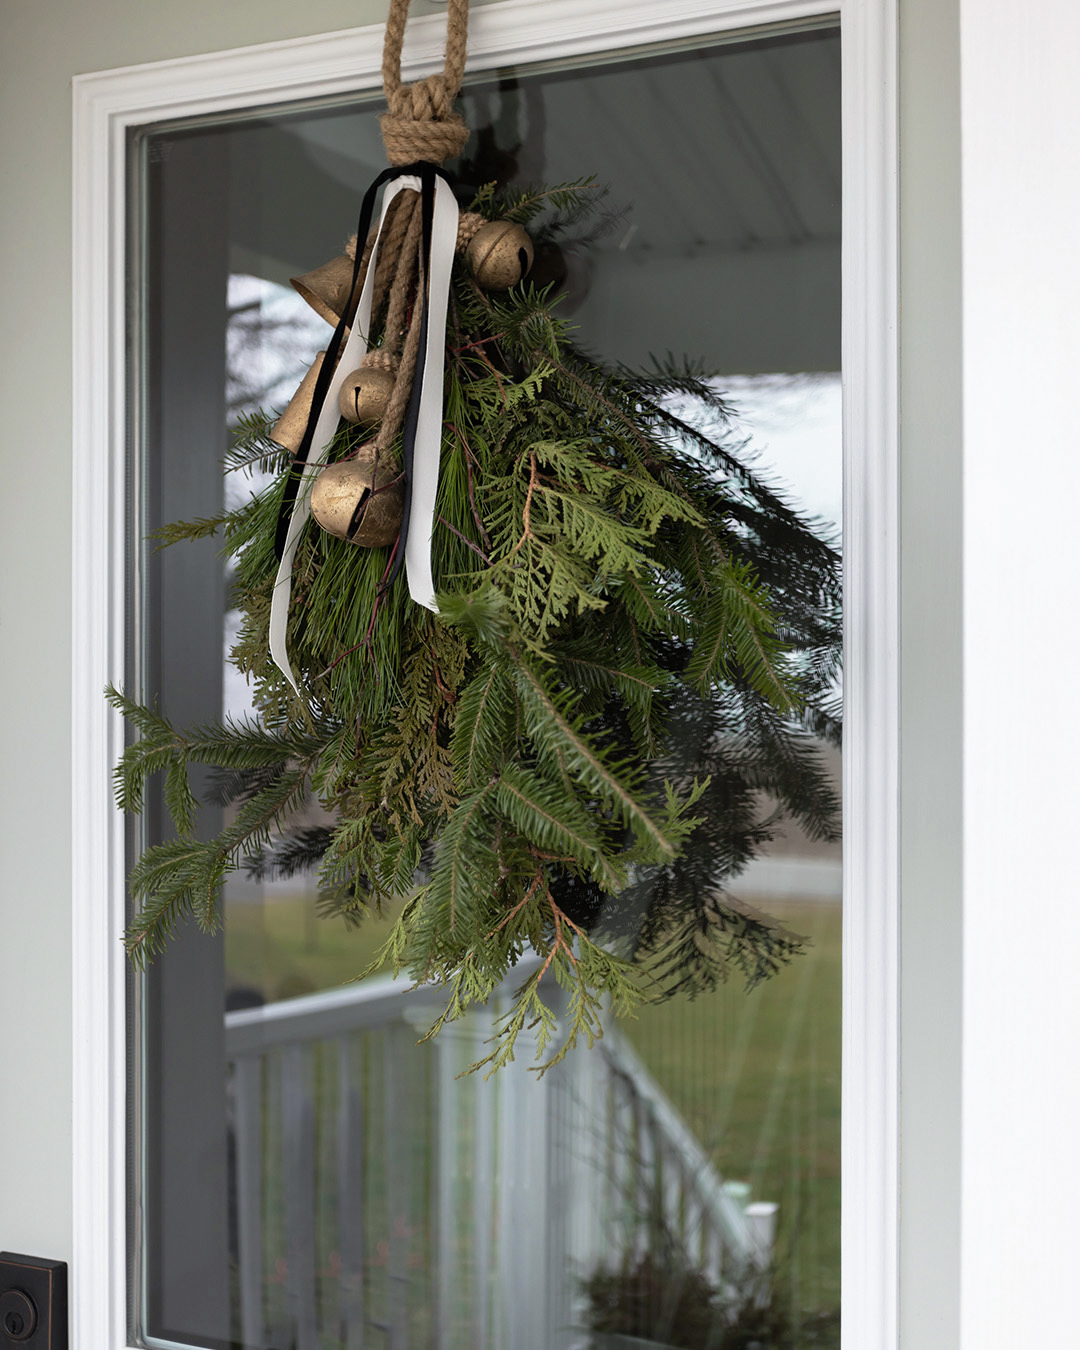 There's nothing like fresh greenery and it's even better if it comes from your own backyard. Grab your clippers and make this foraged Christmas door swag for your front door!